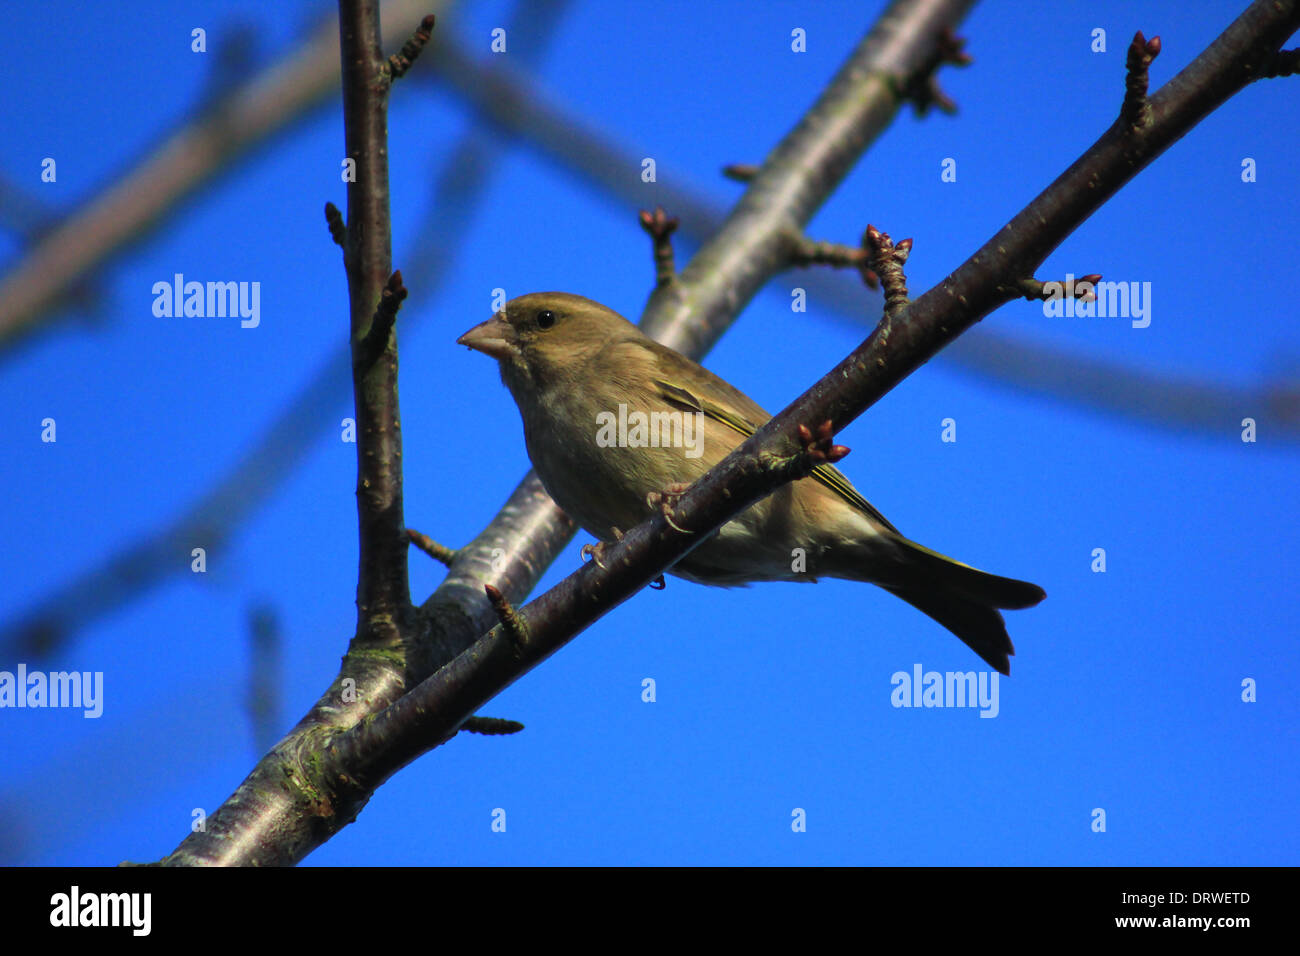 Female greenfinch on tree branch Stock Photo